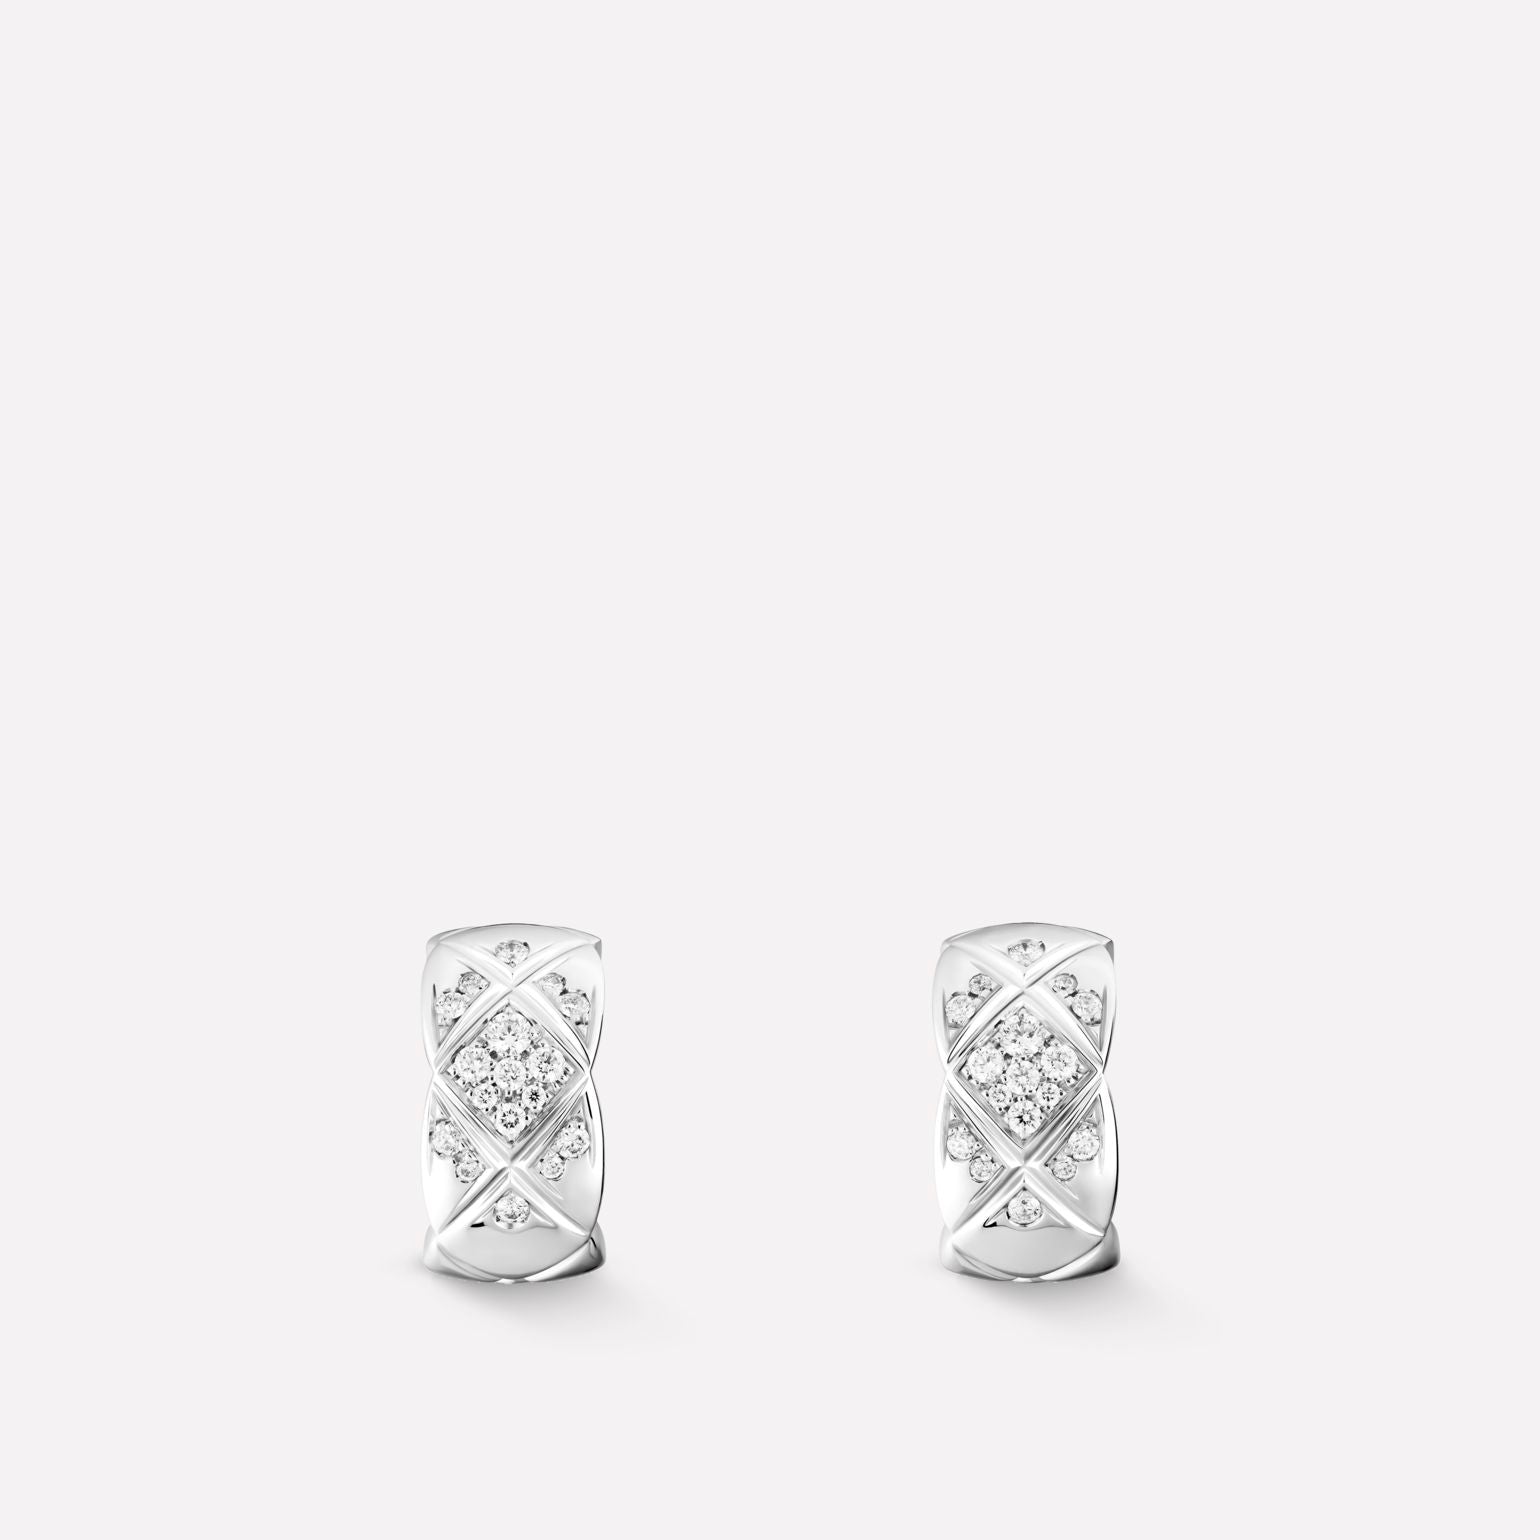 COCO CRUSH EARRINGS QUILTED MOTIF, 18K WHITE GOLD, DIAMONDS